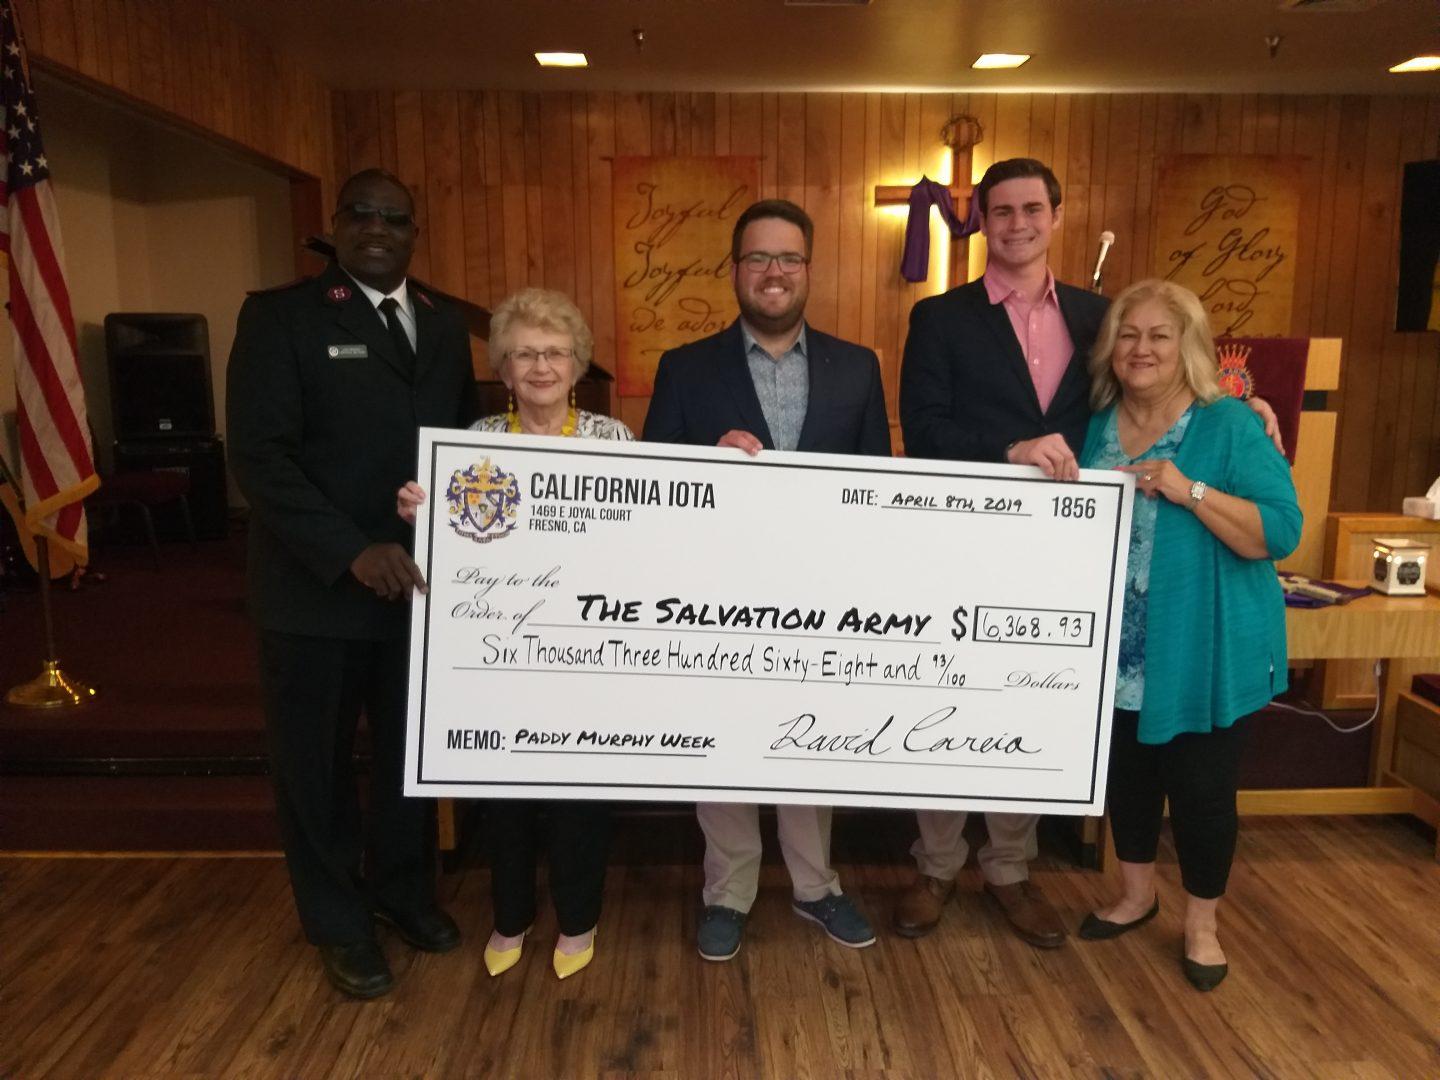 Lt. Lee Vale Butler, Merjean Webster, Grant Rogers, Ryan Dami, & Anita Miranda (Left to right)  at the check presentation for the Salvation Army.  (Courtesy Fresno State Sigma Alpha Epsilon)